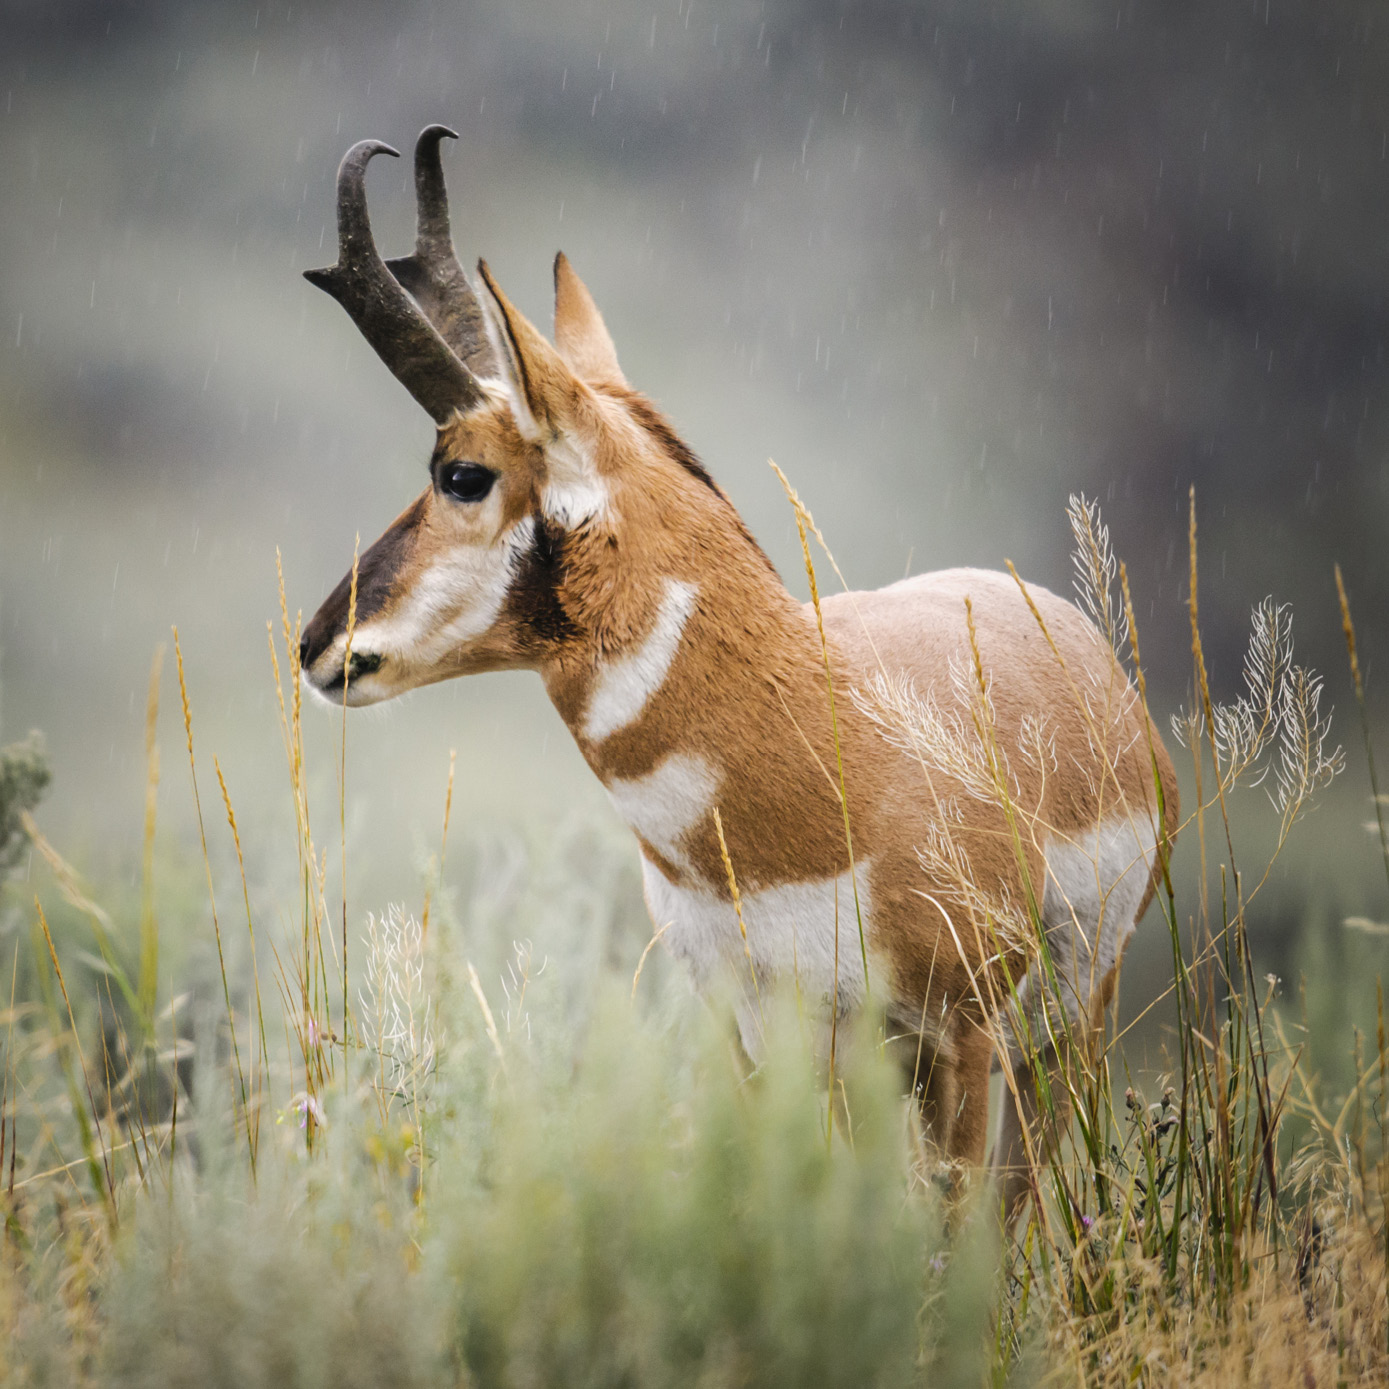 Path of the Pronghorn